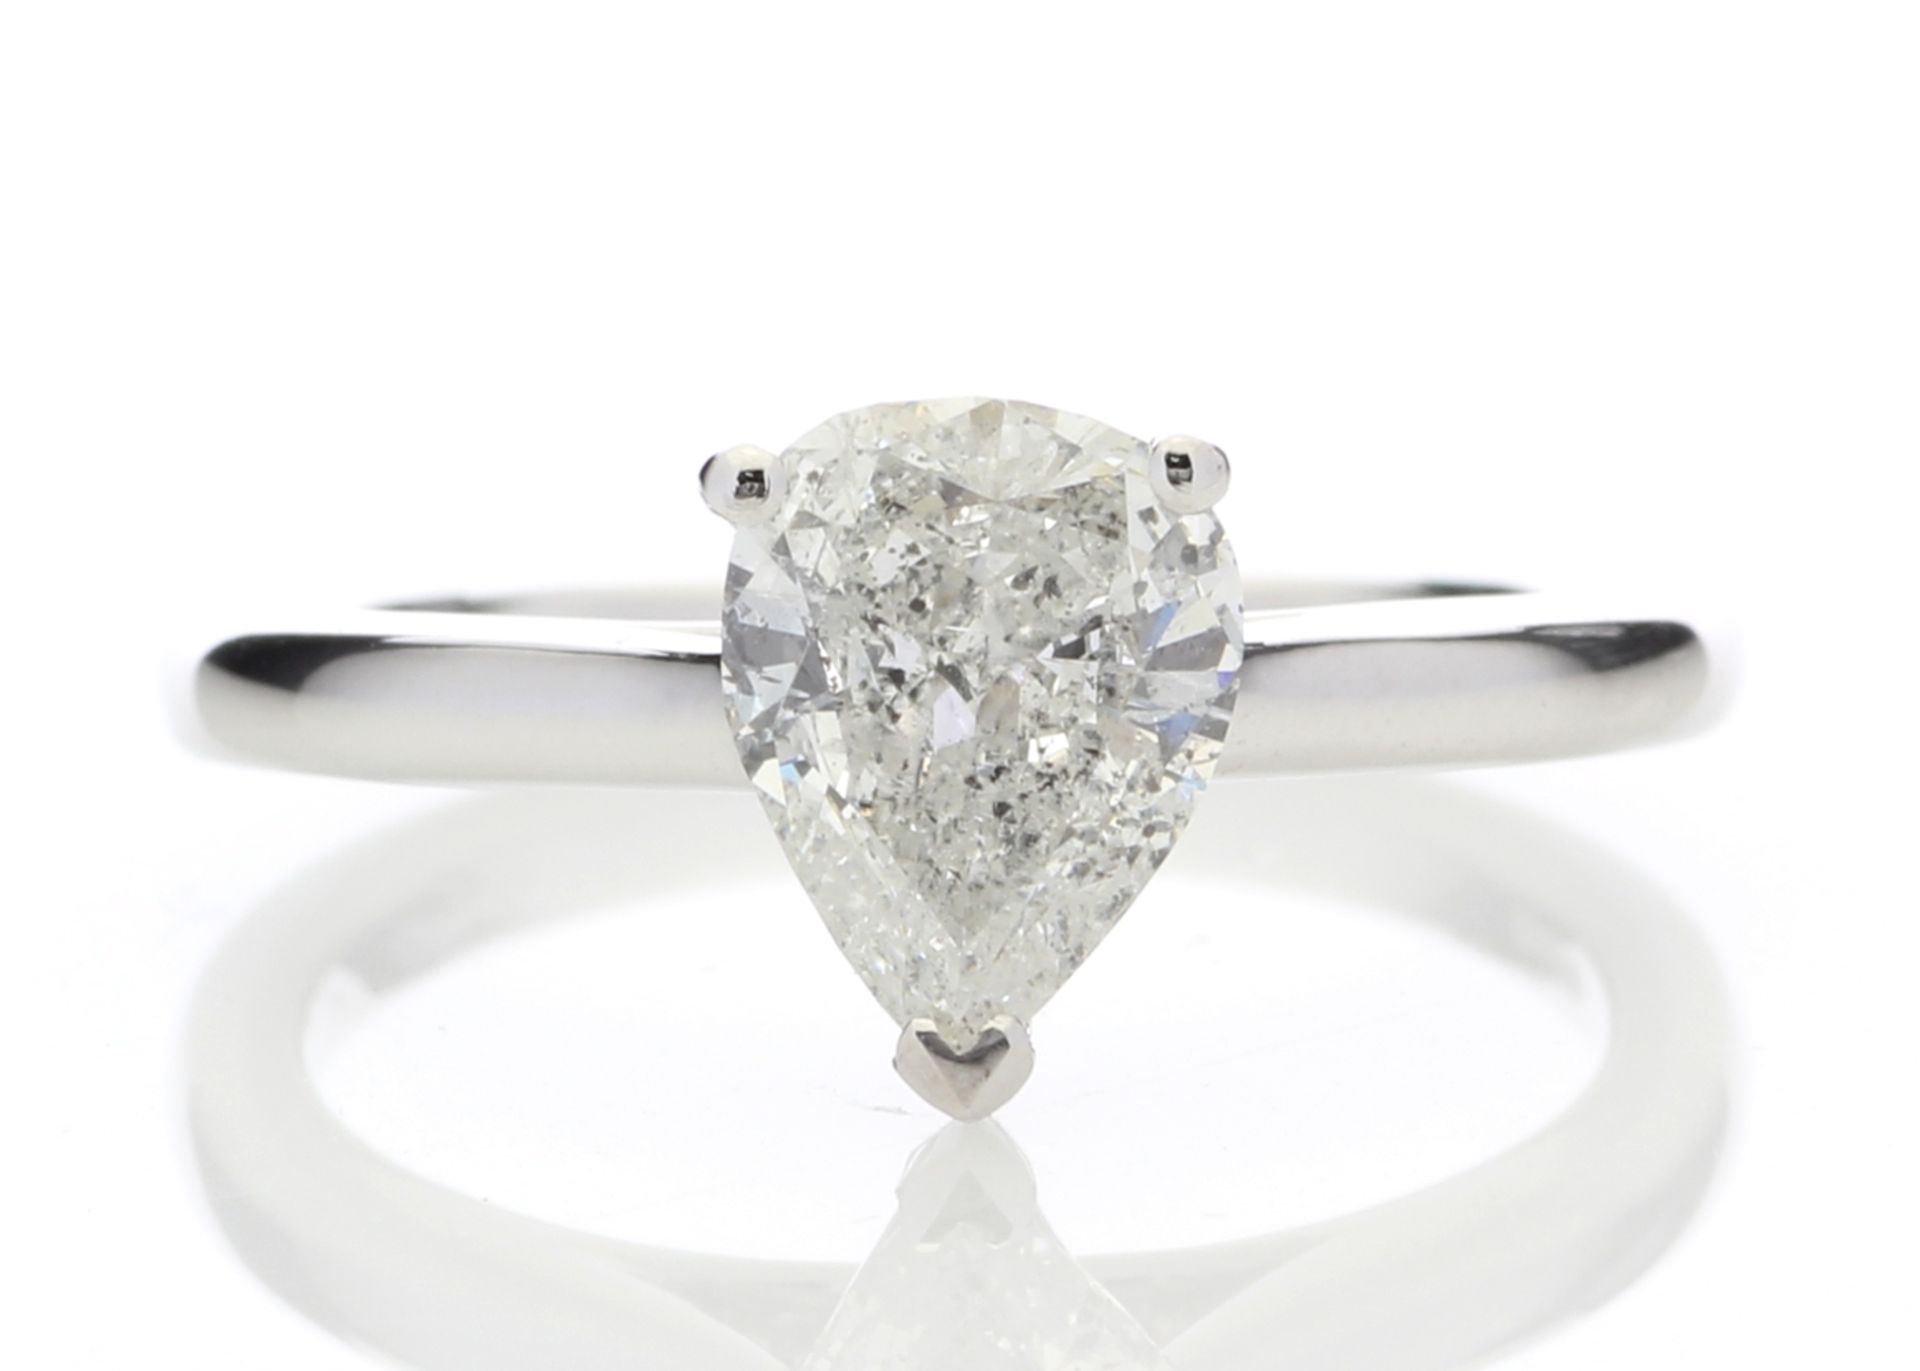 18ct White Gold Single Stone Pear Cut Diamond Ring 1.02 Carats - Valued by GIE £18,350.00 - One